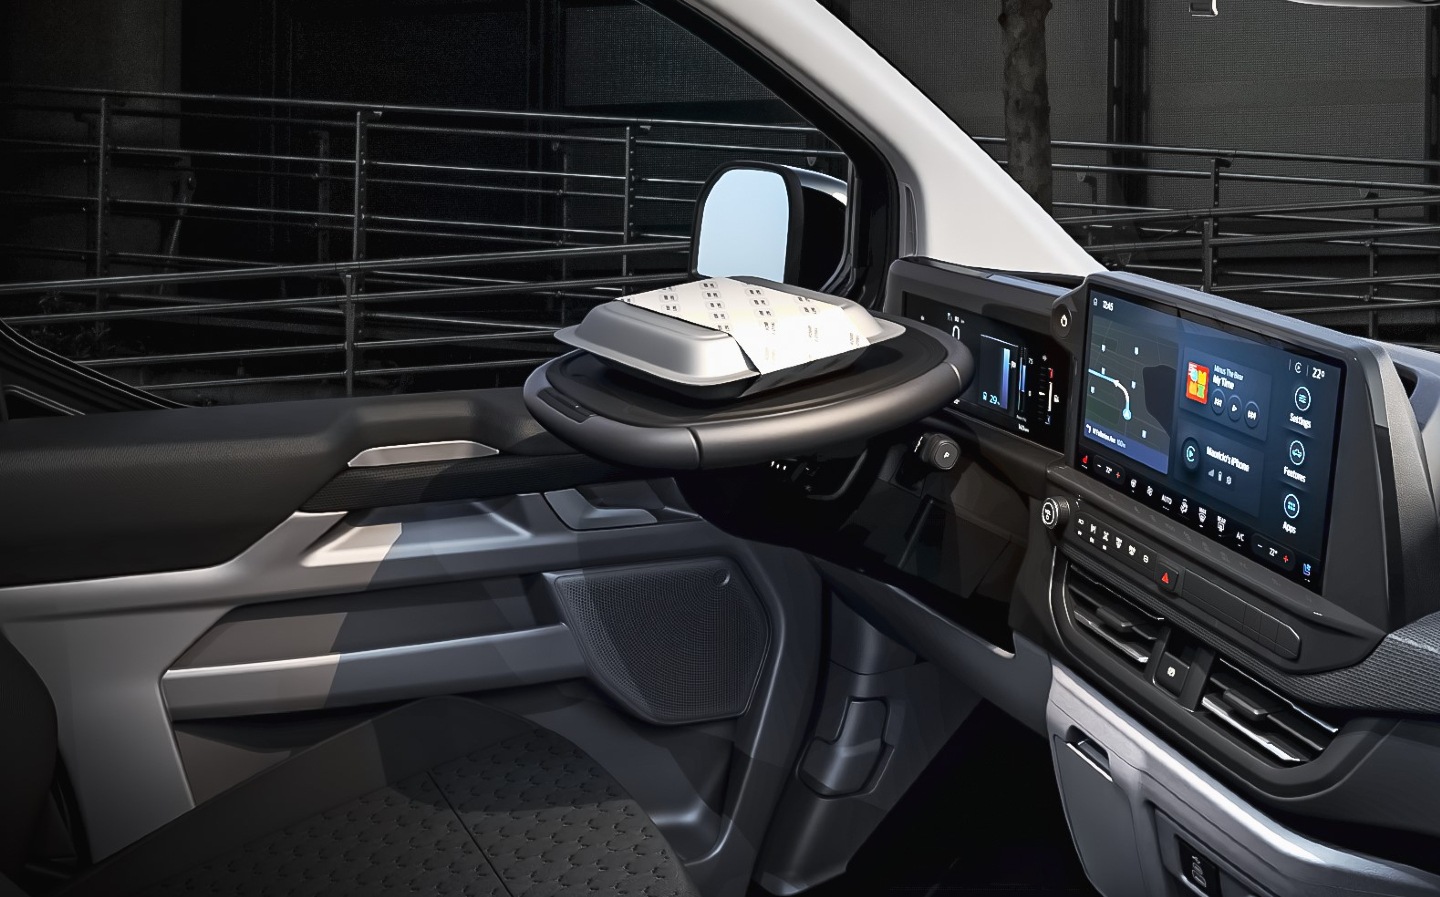 New Transit van has a tilting steering wheel that acts as a meal tray or  laptop